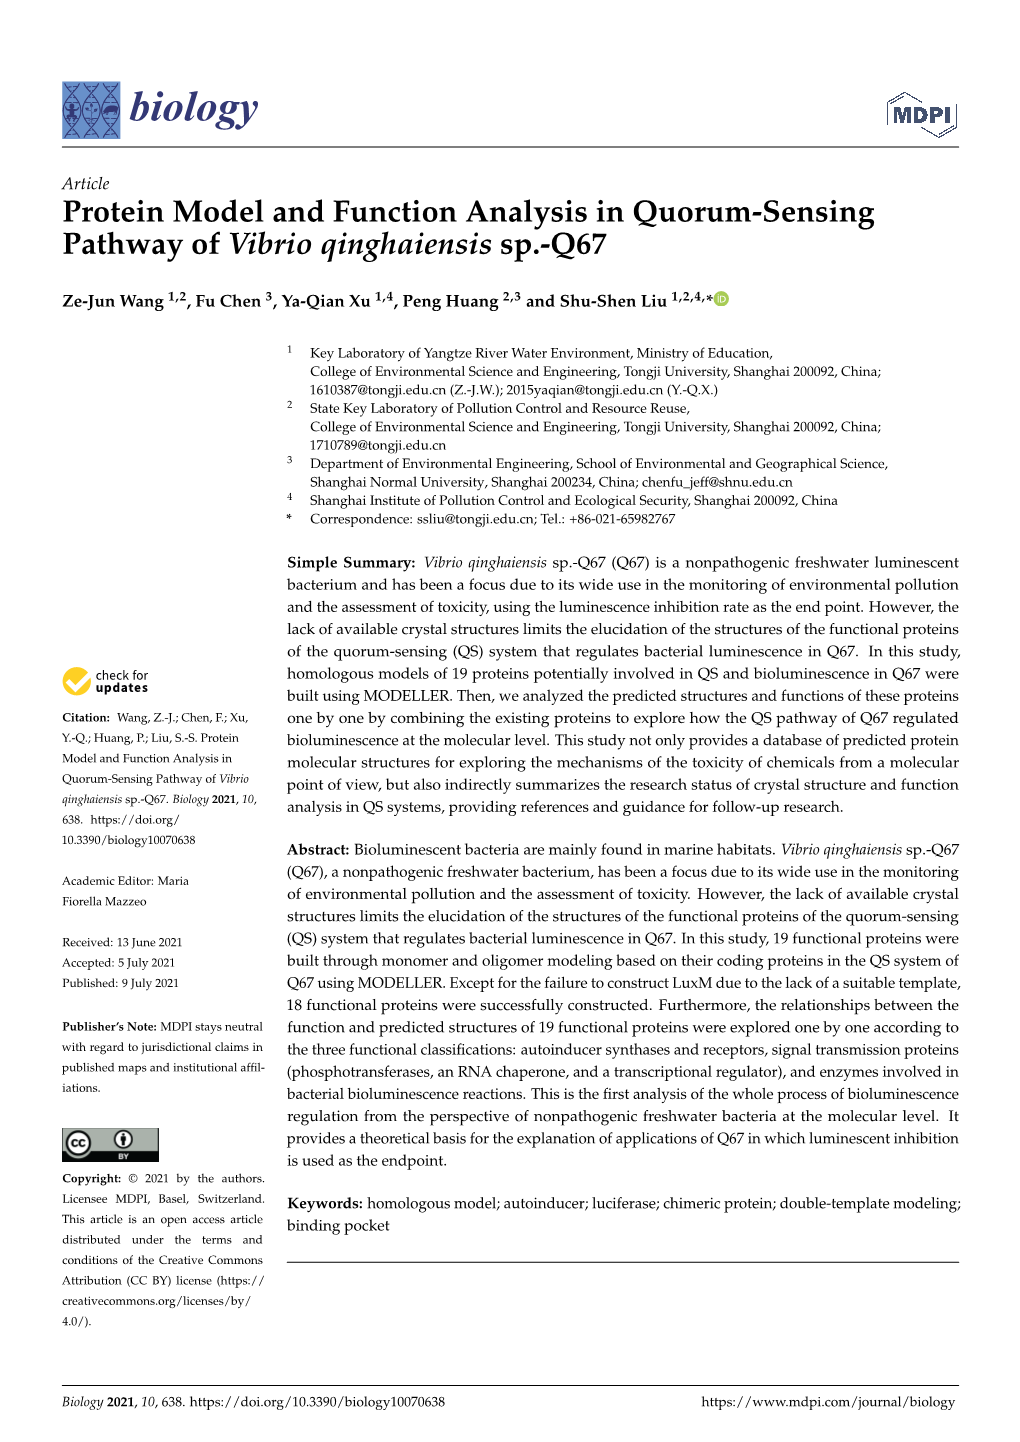 Protein Model and Function Analysis in Quorum-Sensing Pathway of Vibrio Qinghaiensis Sp.-Q67